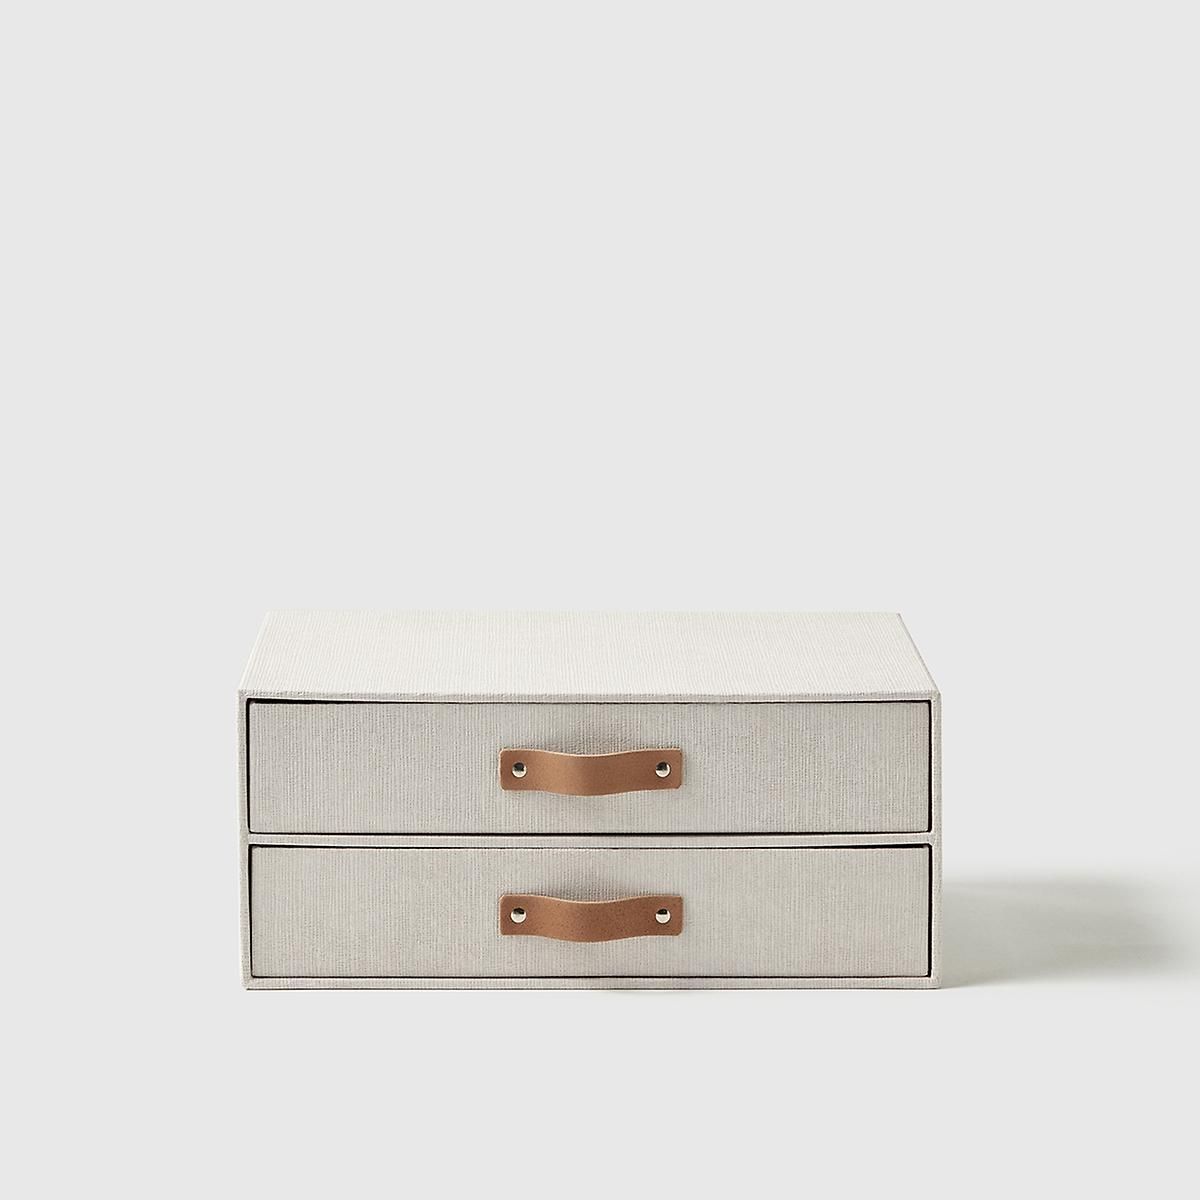 Marie Kondo Calm Paper Drawers | The Container Store